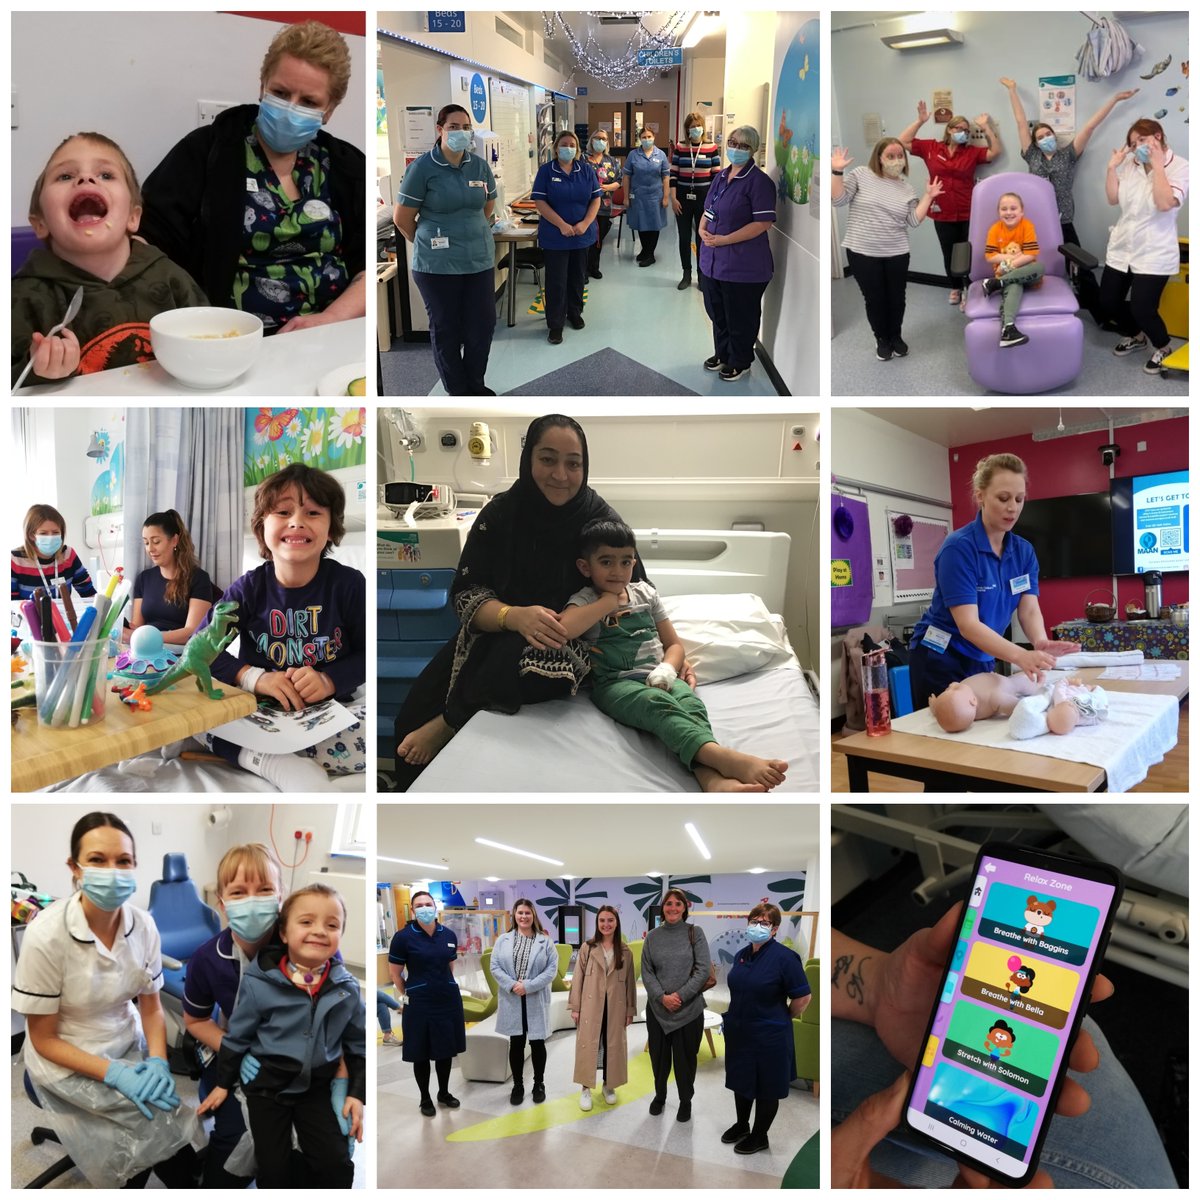 It's been another amazing #NHSSuperSaturday at Leeds Children's Hospital. Thank you to all our wonderful colleagues for everything you have done today and thank you to our lovely patients and families for coming to see us on Super Saturday 👏👏👏